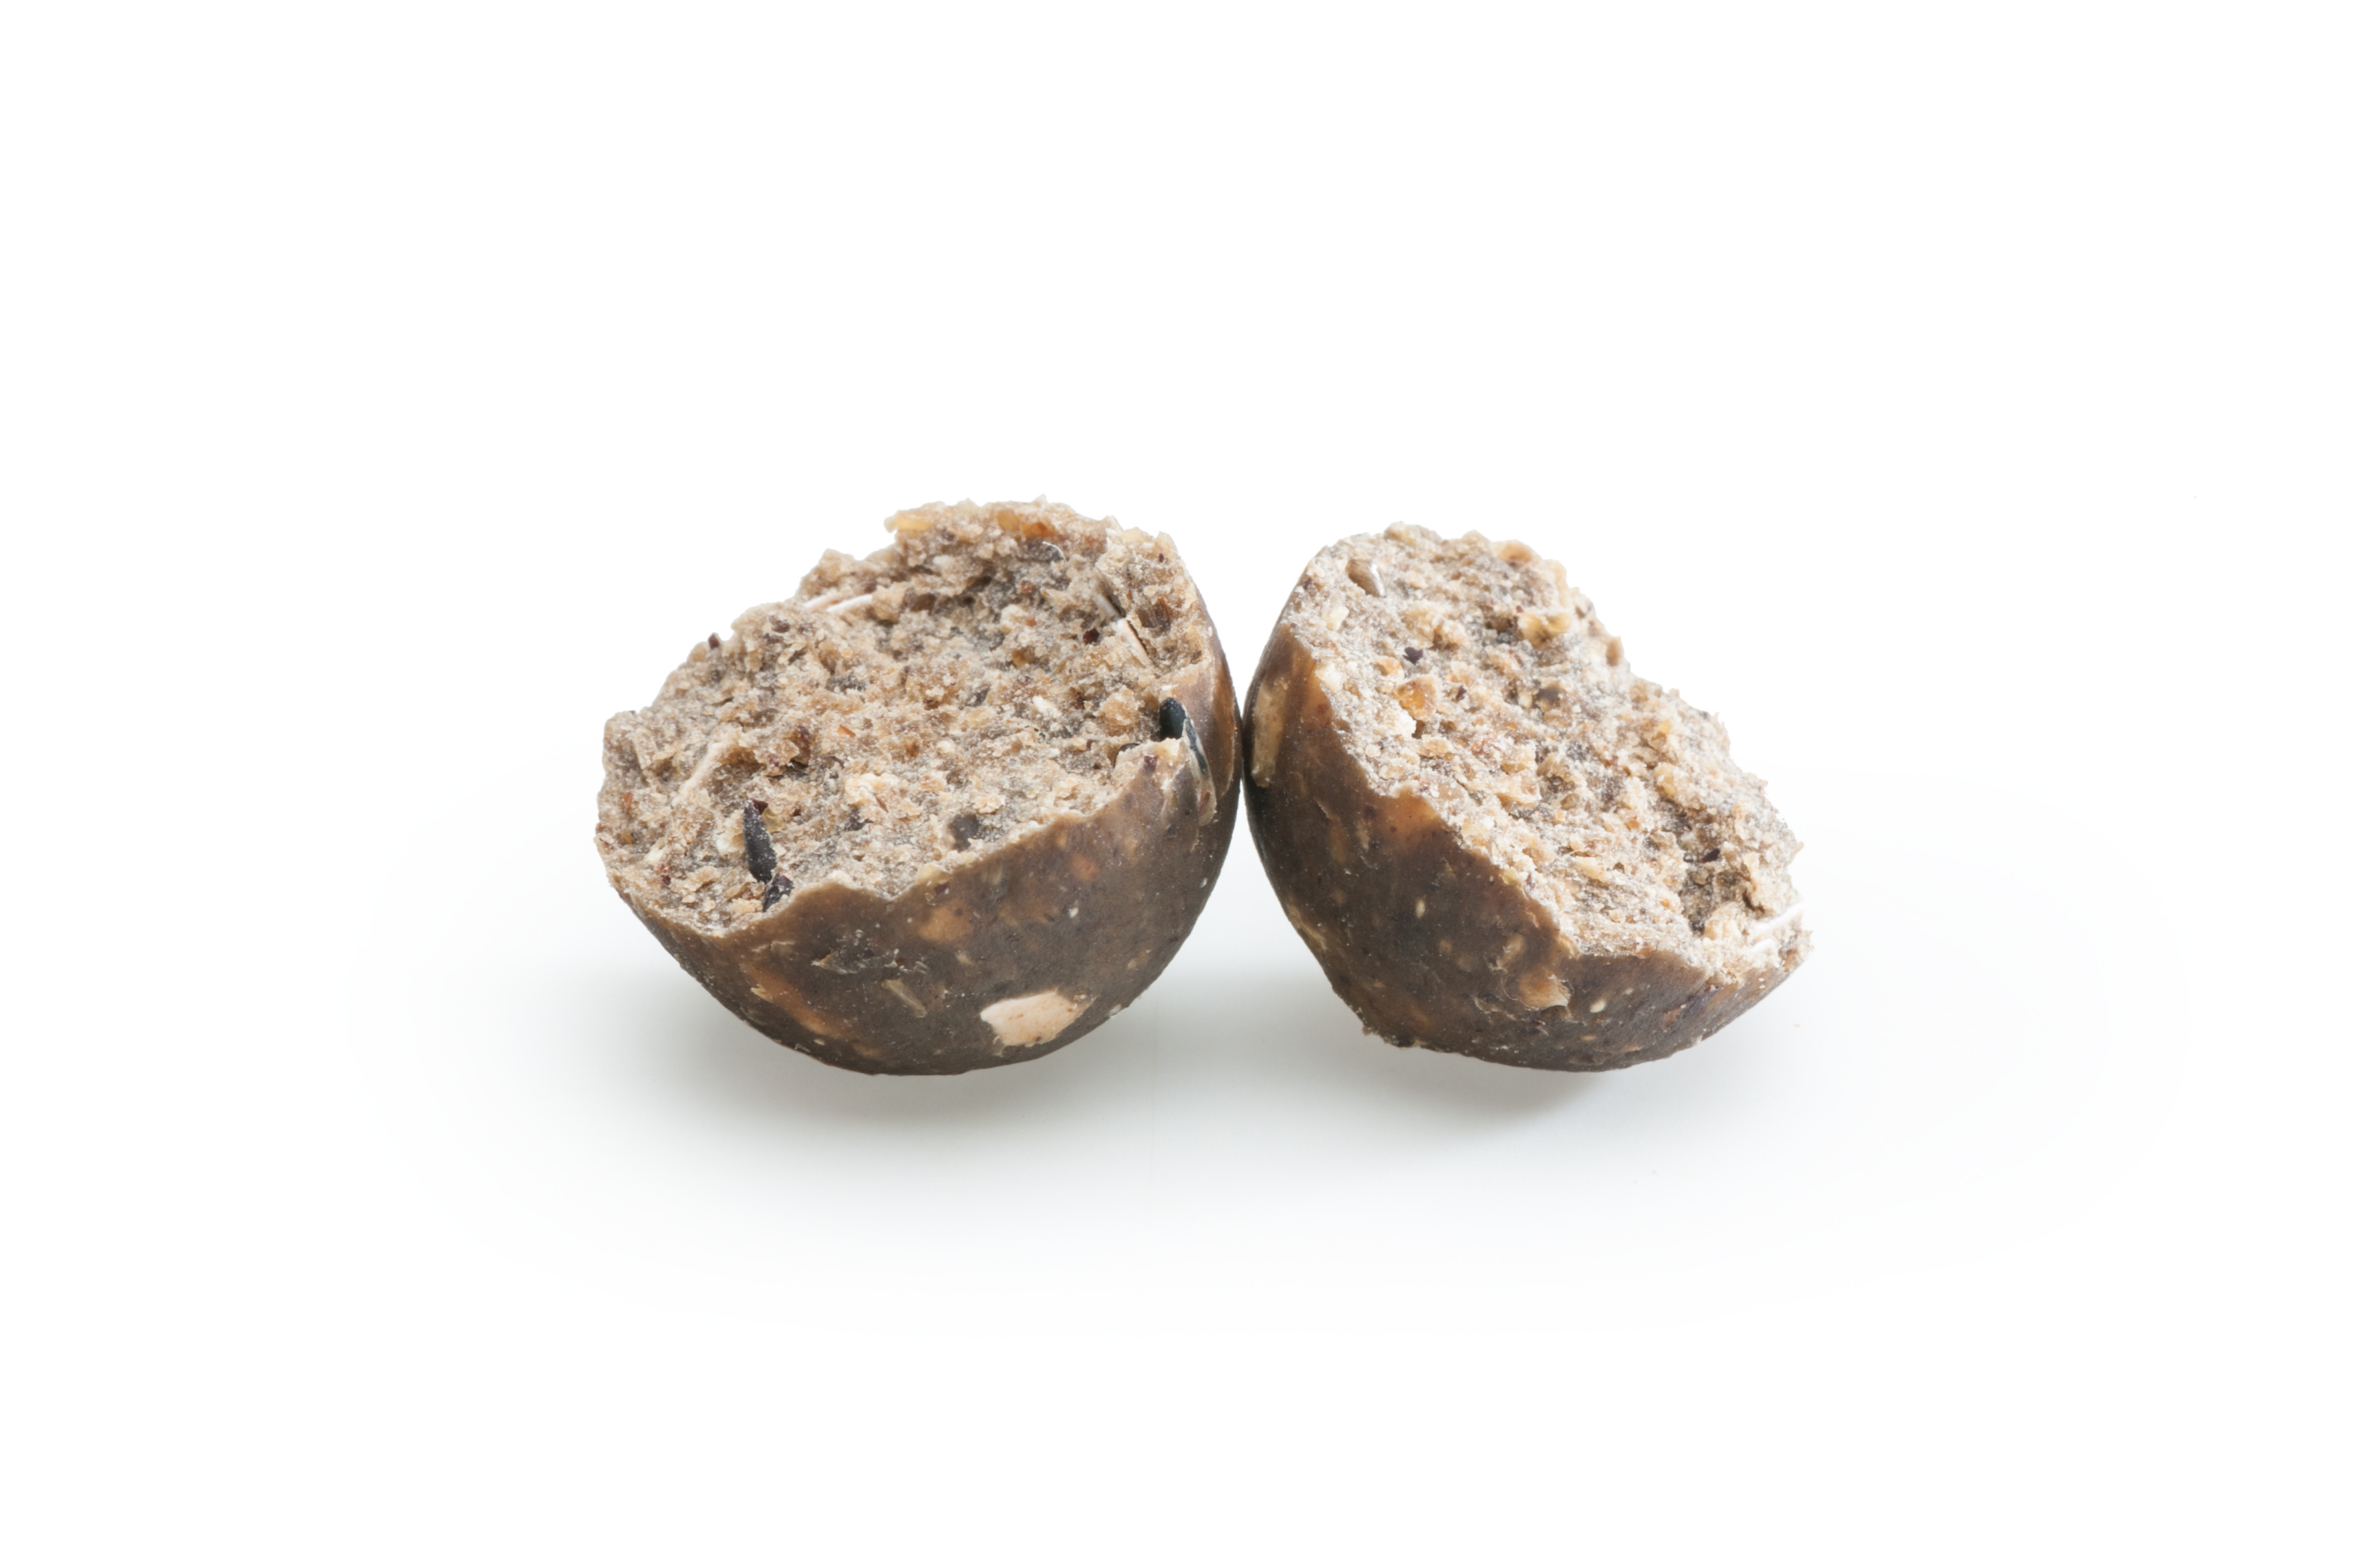 Rapid Boilies Excellent - Monster Crab (950g | 20mm)